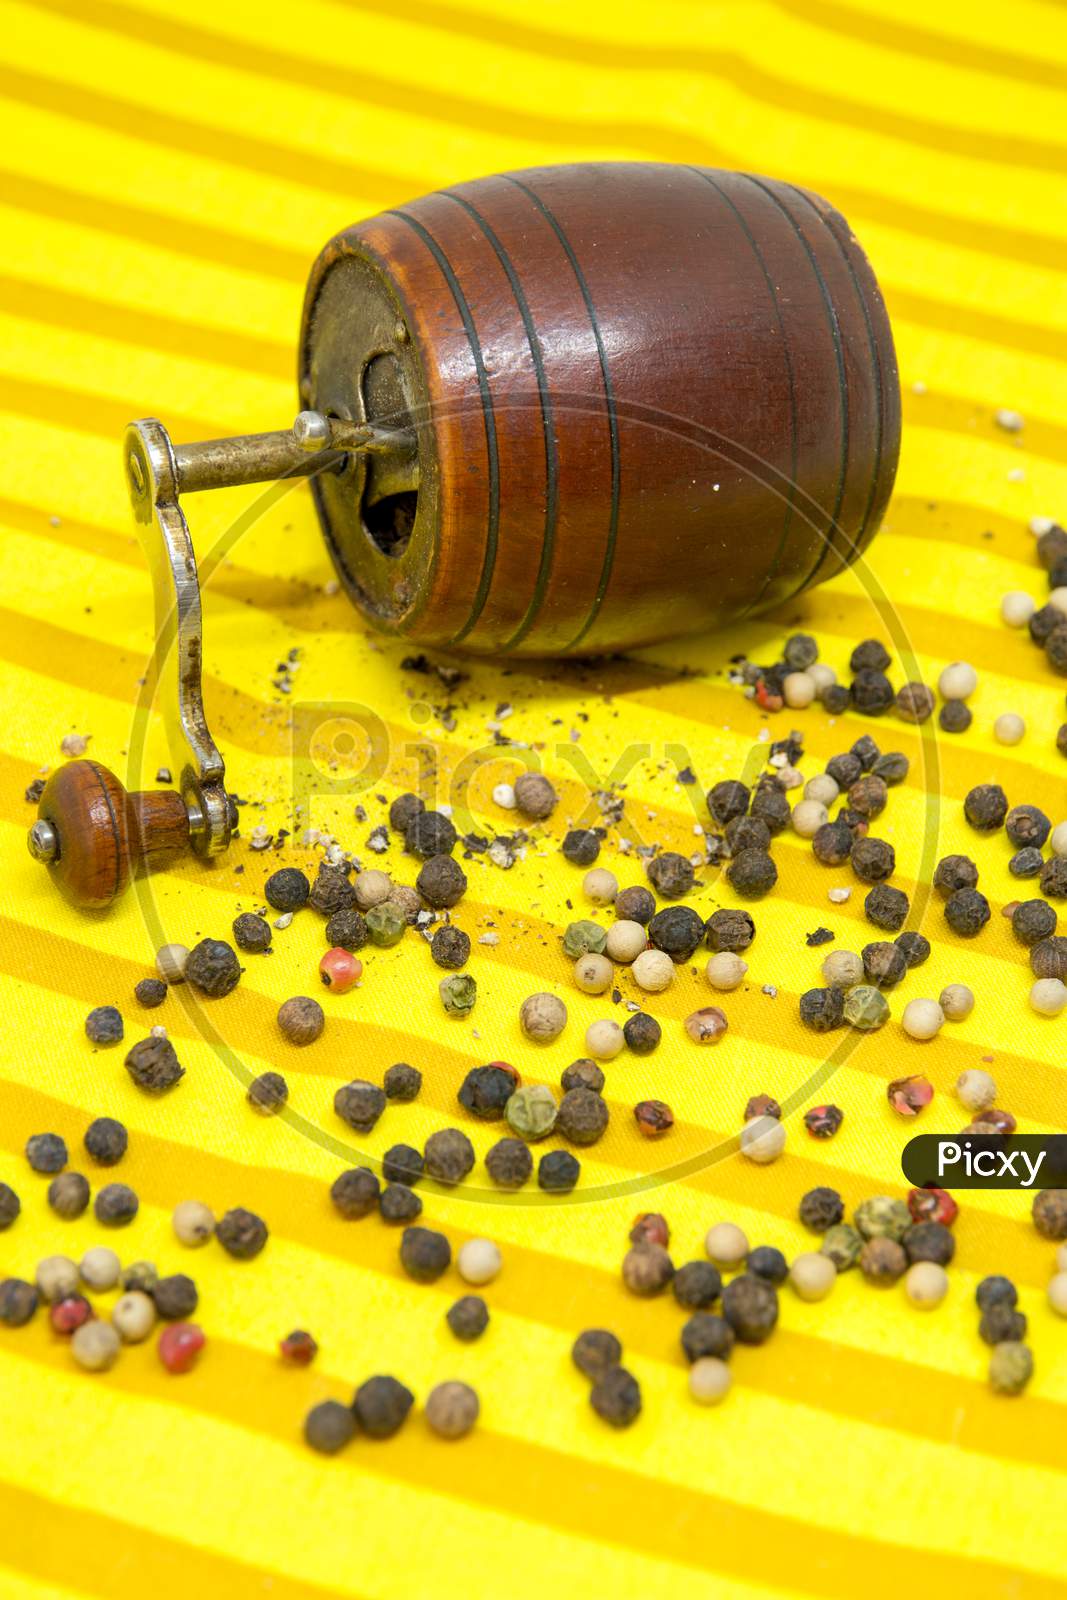 old pepper grinder and assorted pepper whole grains and ground pepper on yellow cloth